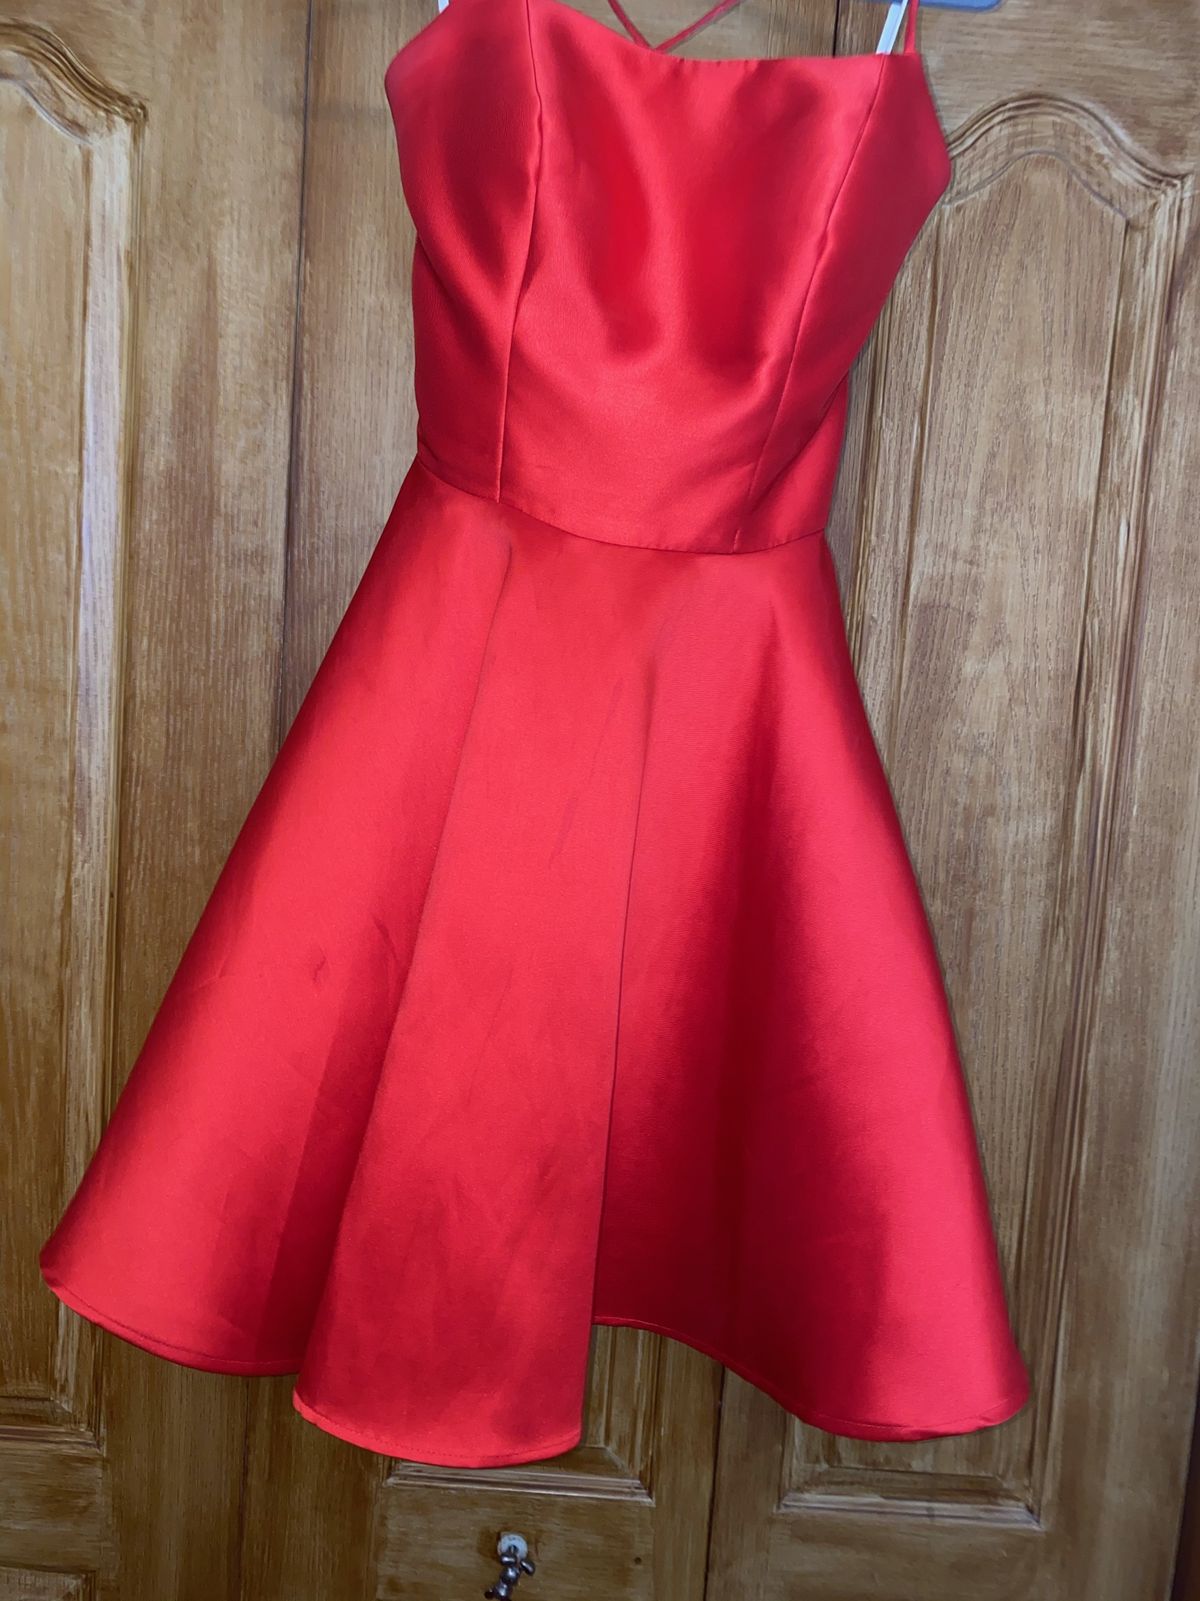 Alyce Paris Size 2 Lace Red Cocktail Dress on Queenly